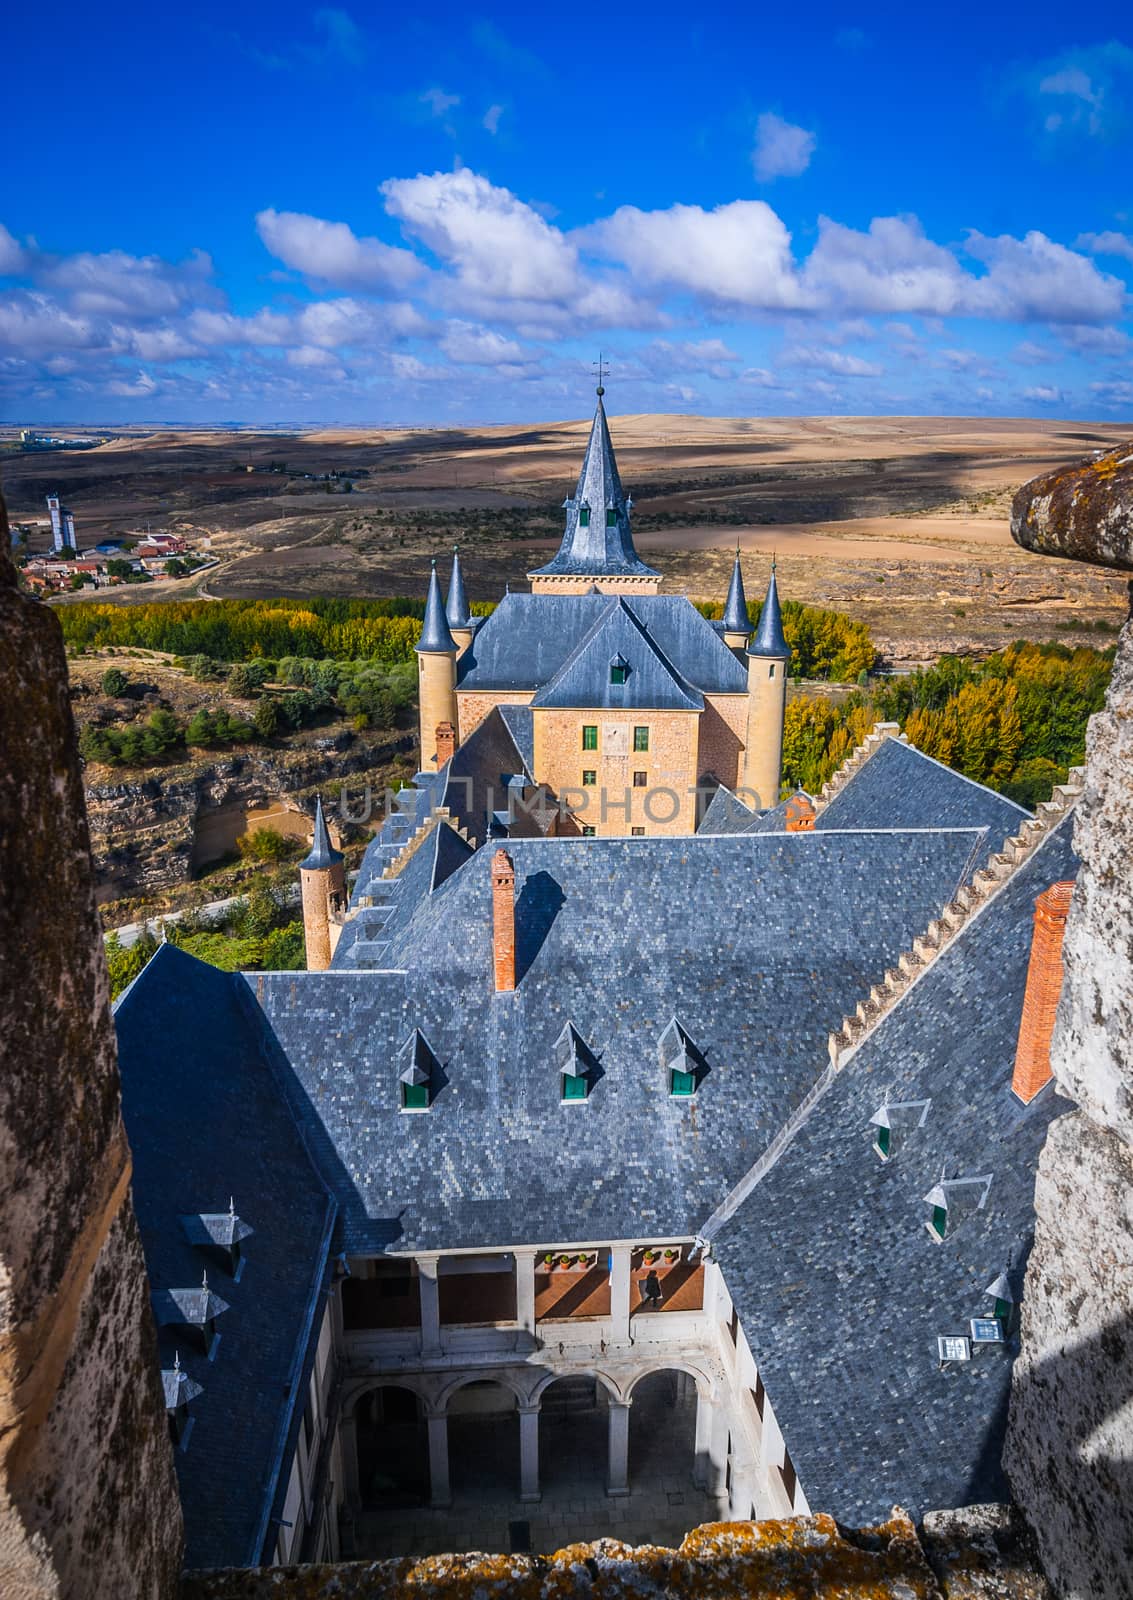 A high up view of the Spanish rural countryside and the castle, from the castle Alcazar.